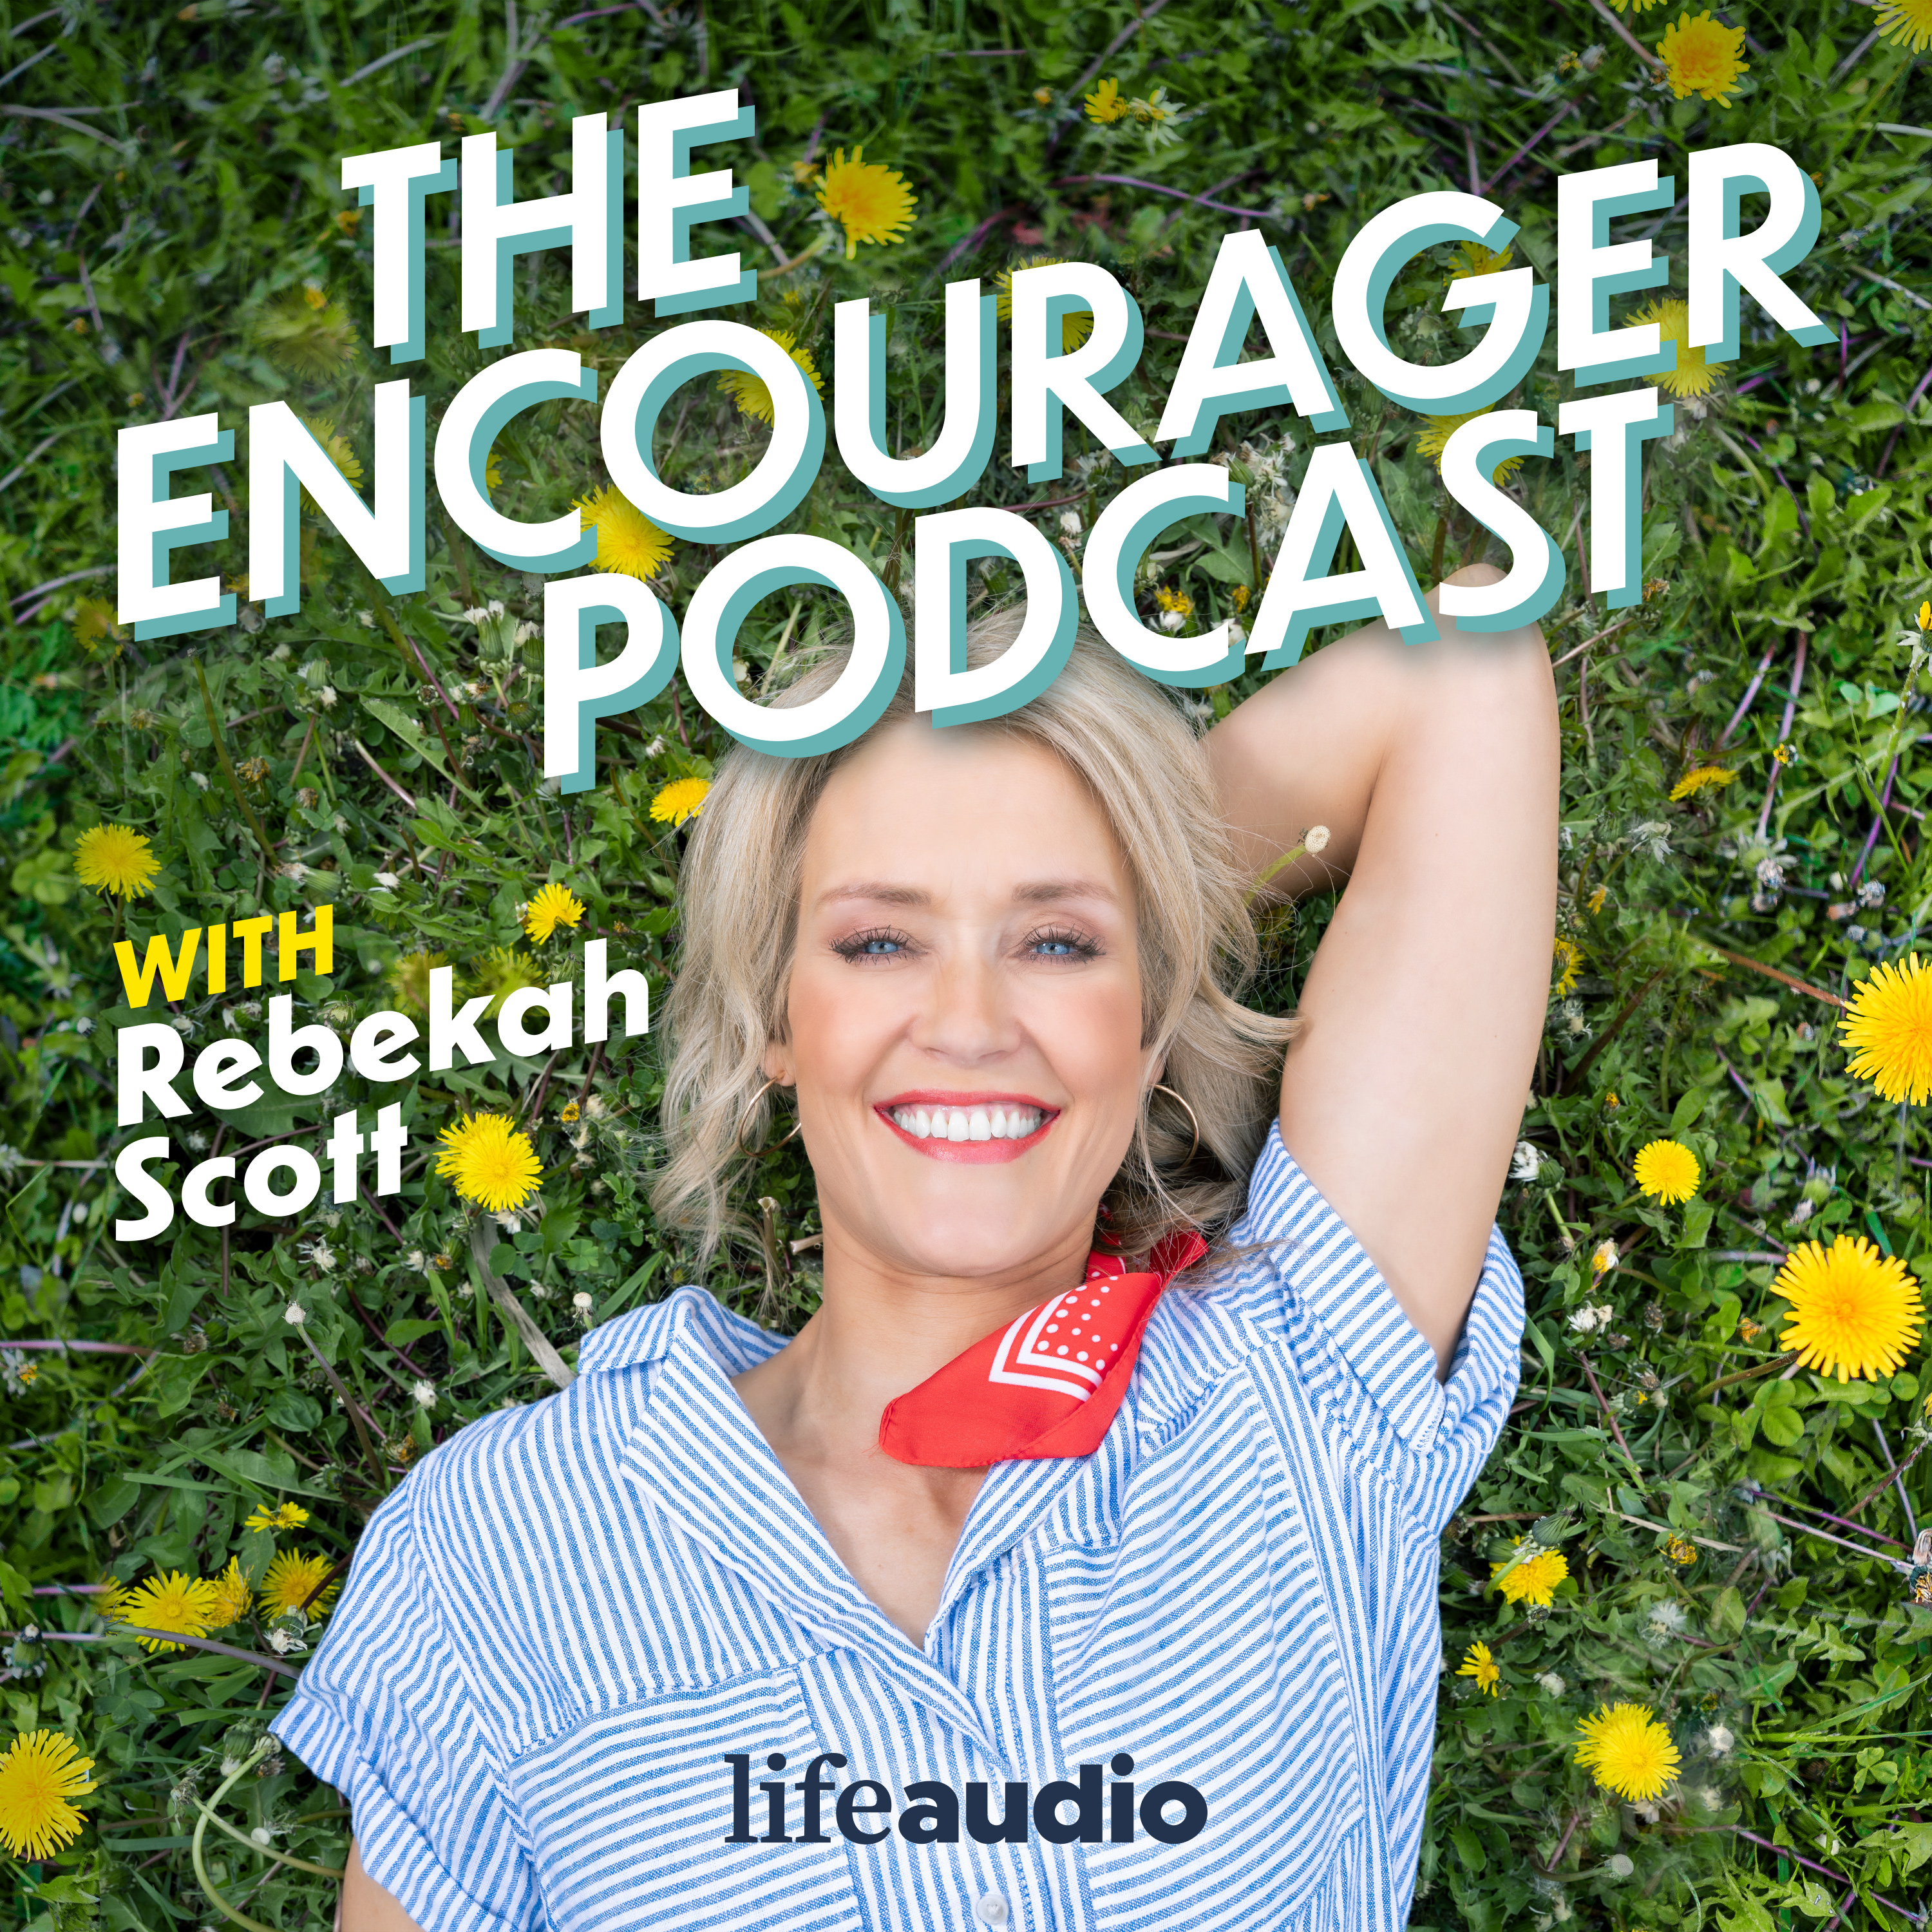 The Encourager Podcast: Equipping Christian Moms to Harmonize Work and Home